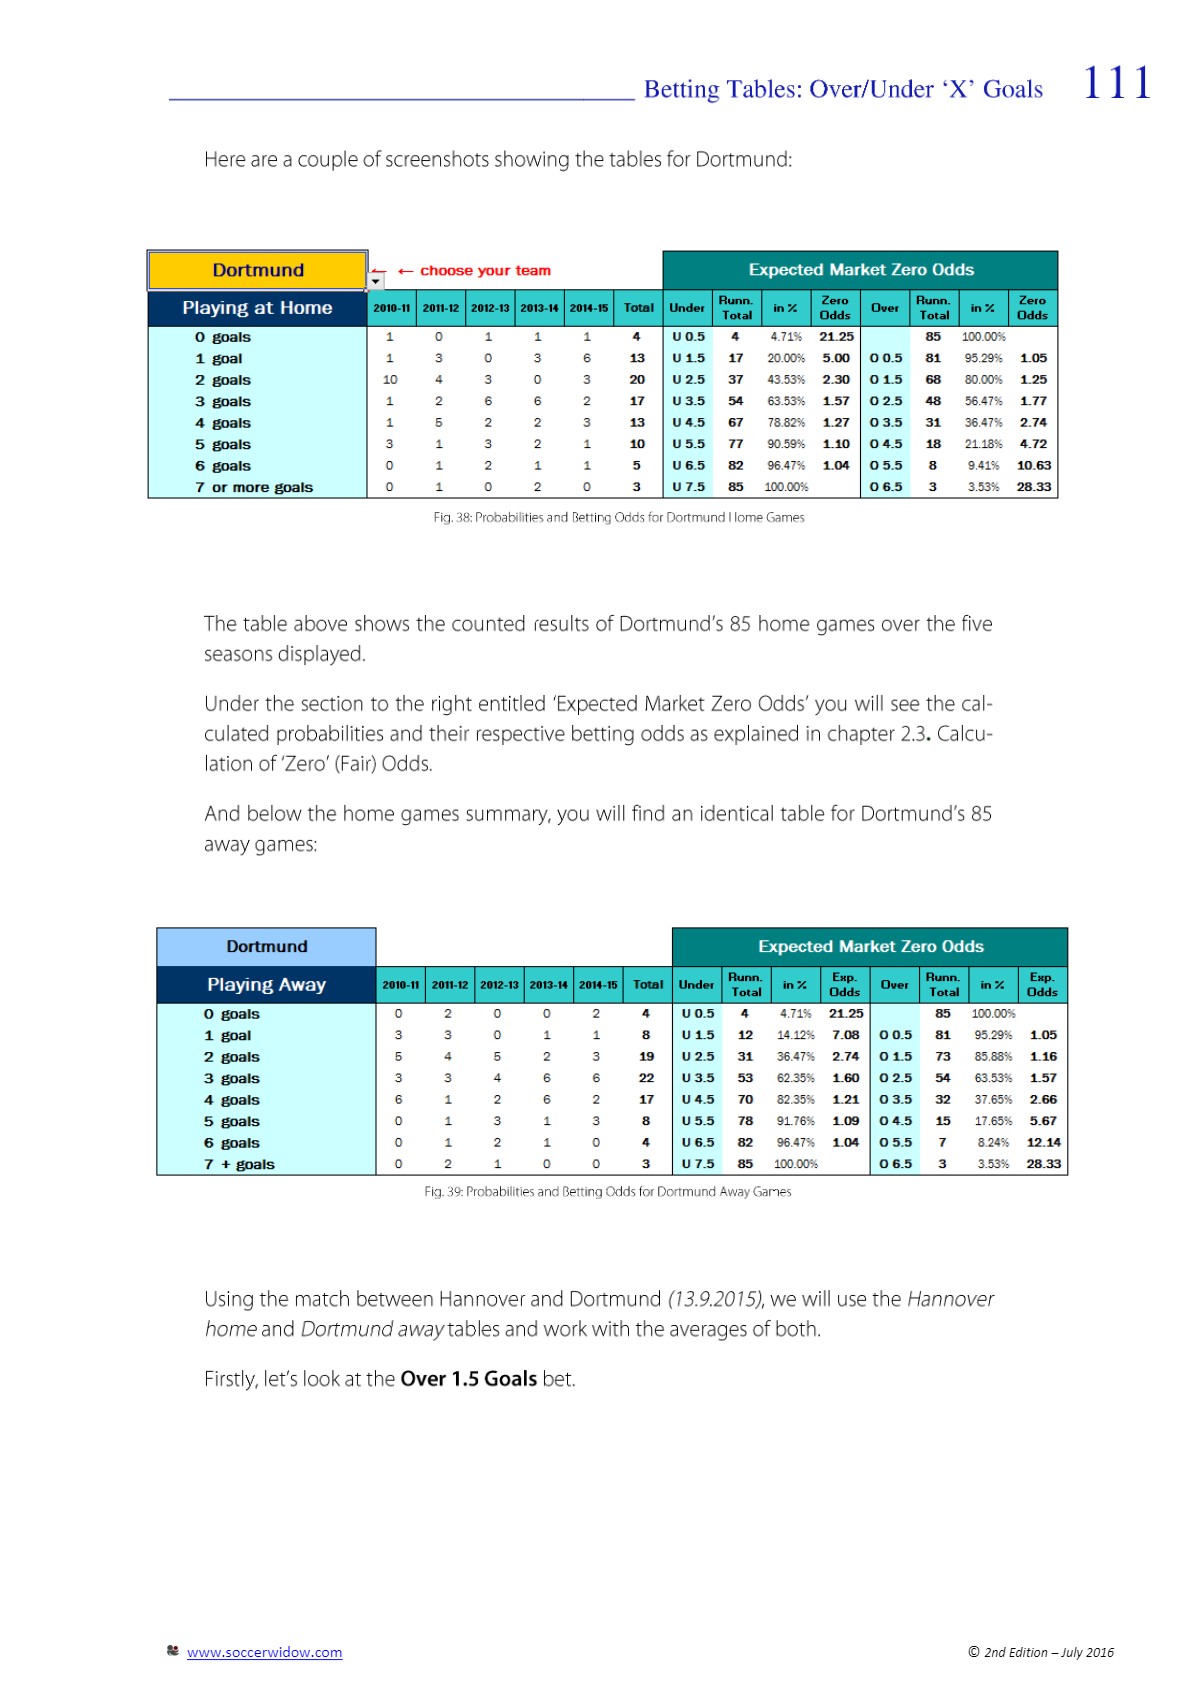 Betting Course Over Under - betting tables - page 111